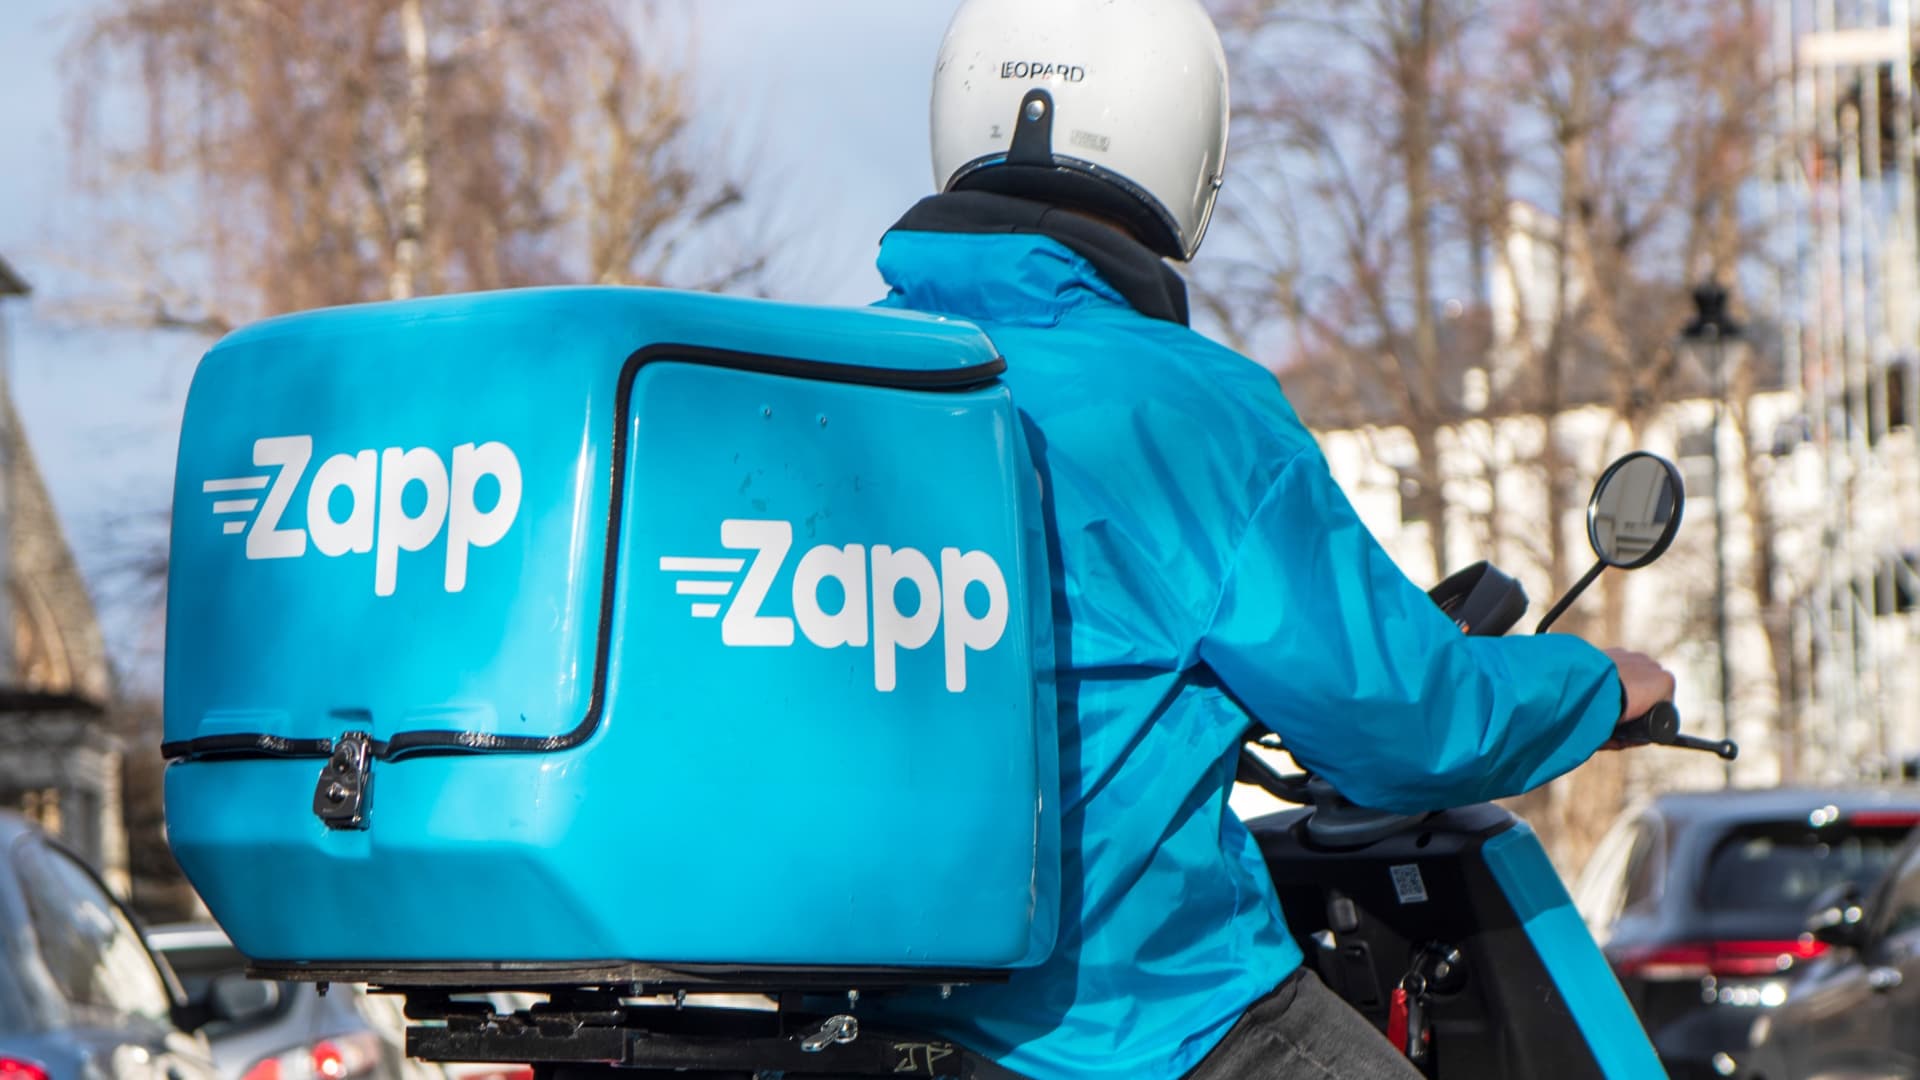 A courier for U.K.-based rapid grocery delivery service Zapp.